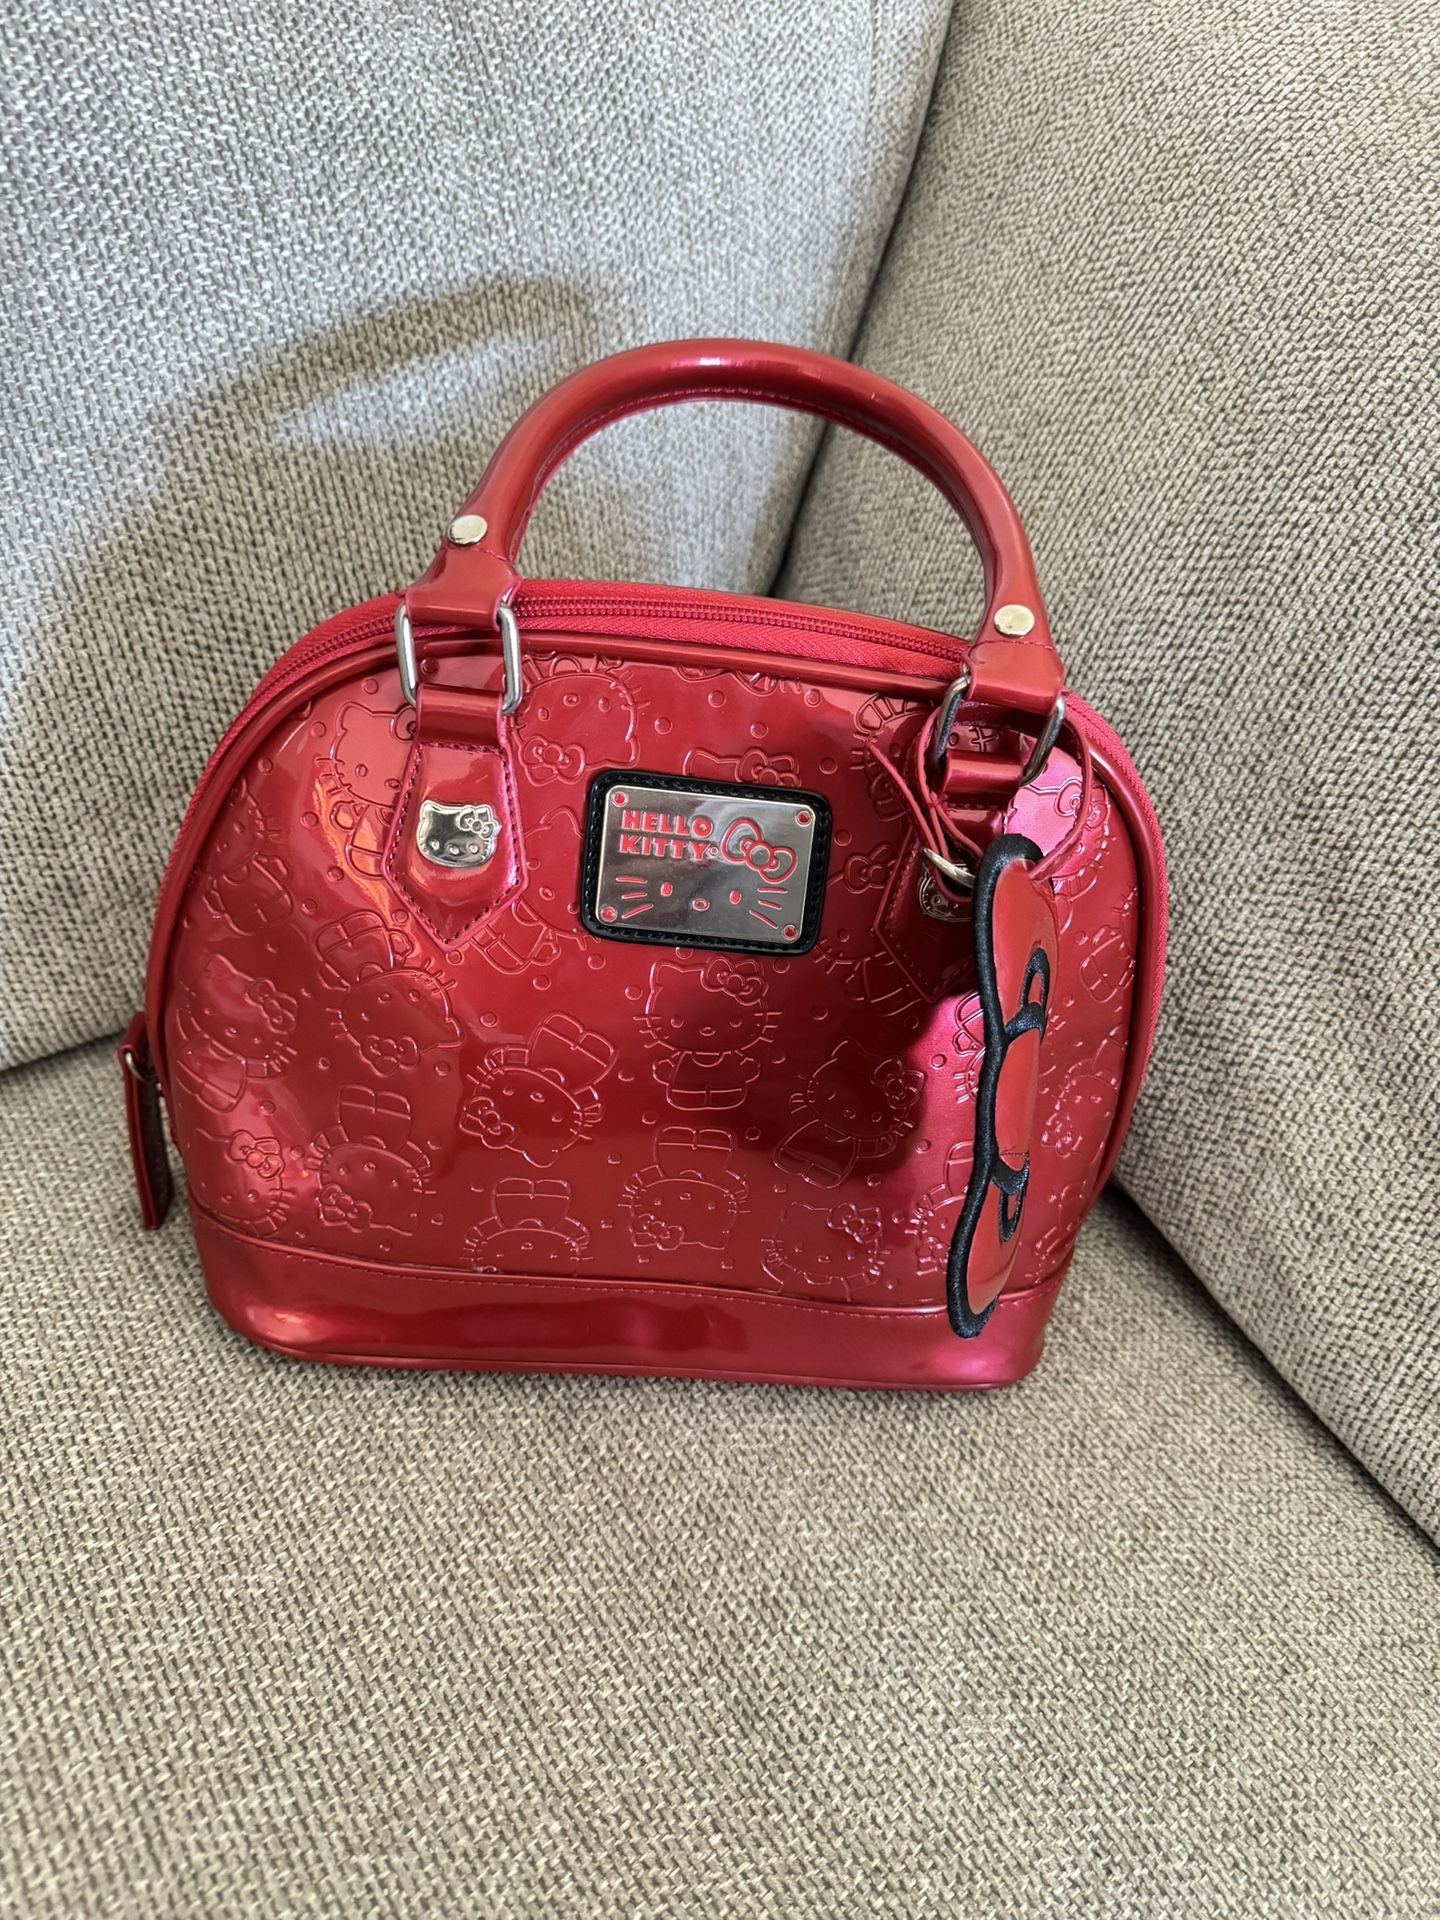 Red Hello Kitty Purse/Bag 